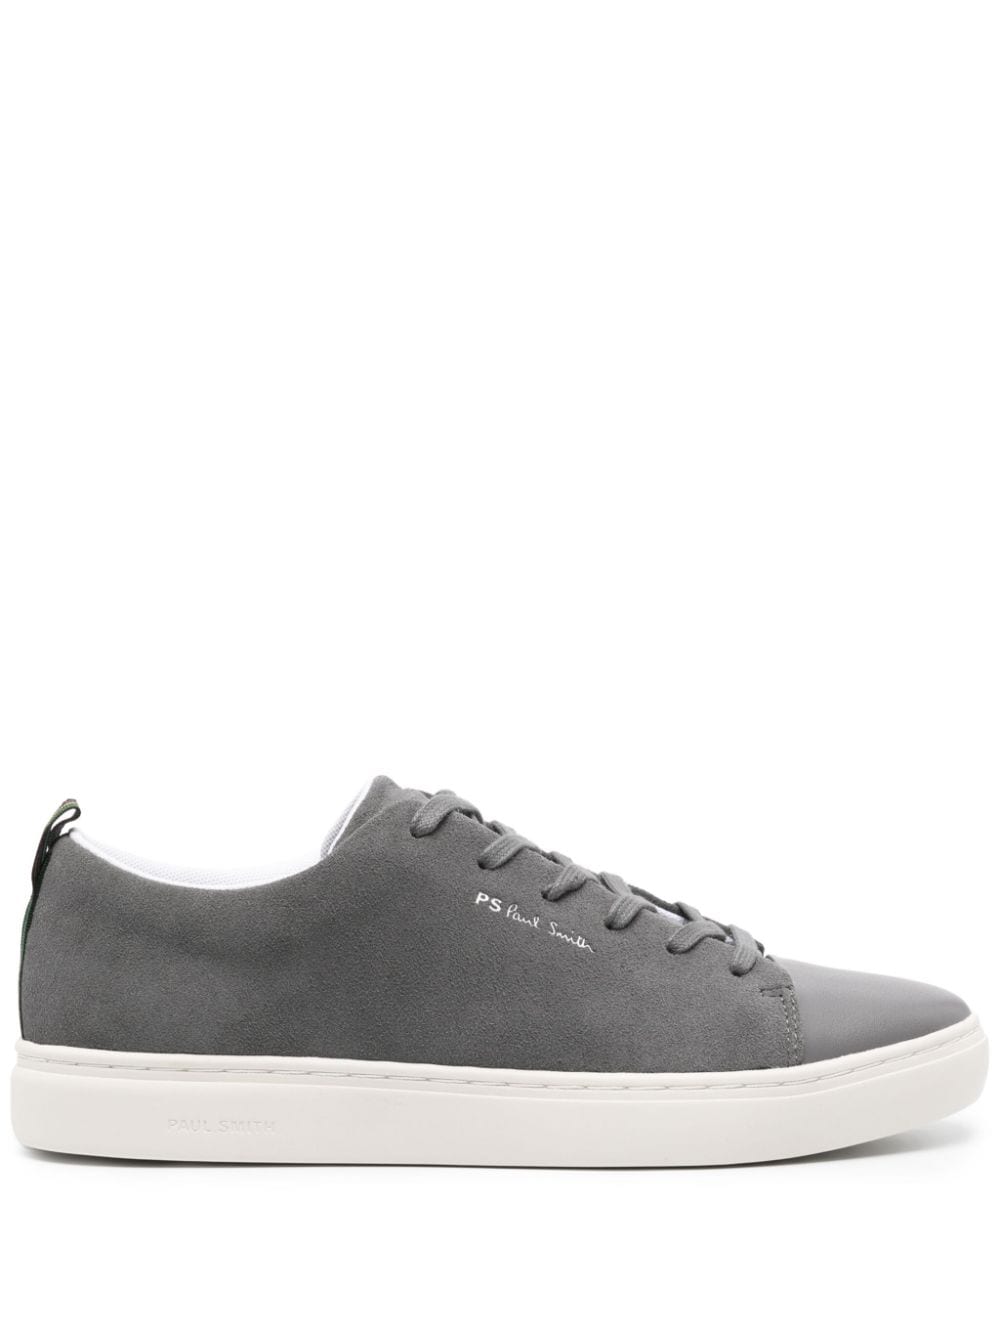 Ps By Paul Smith Lee Suede Sneakers In Grey